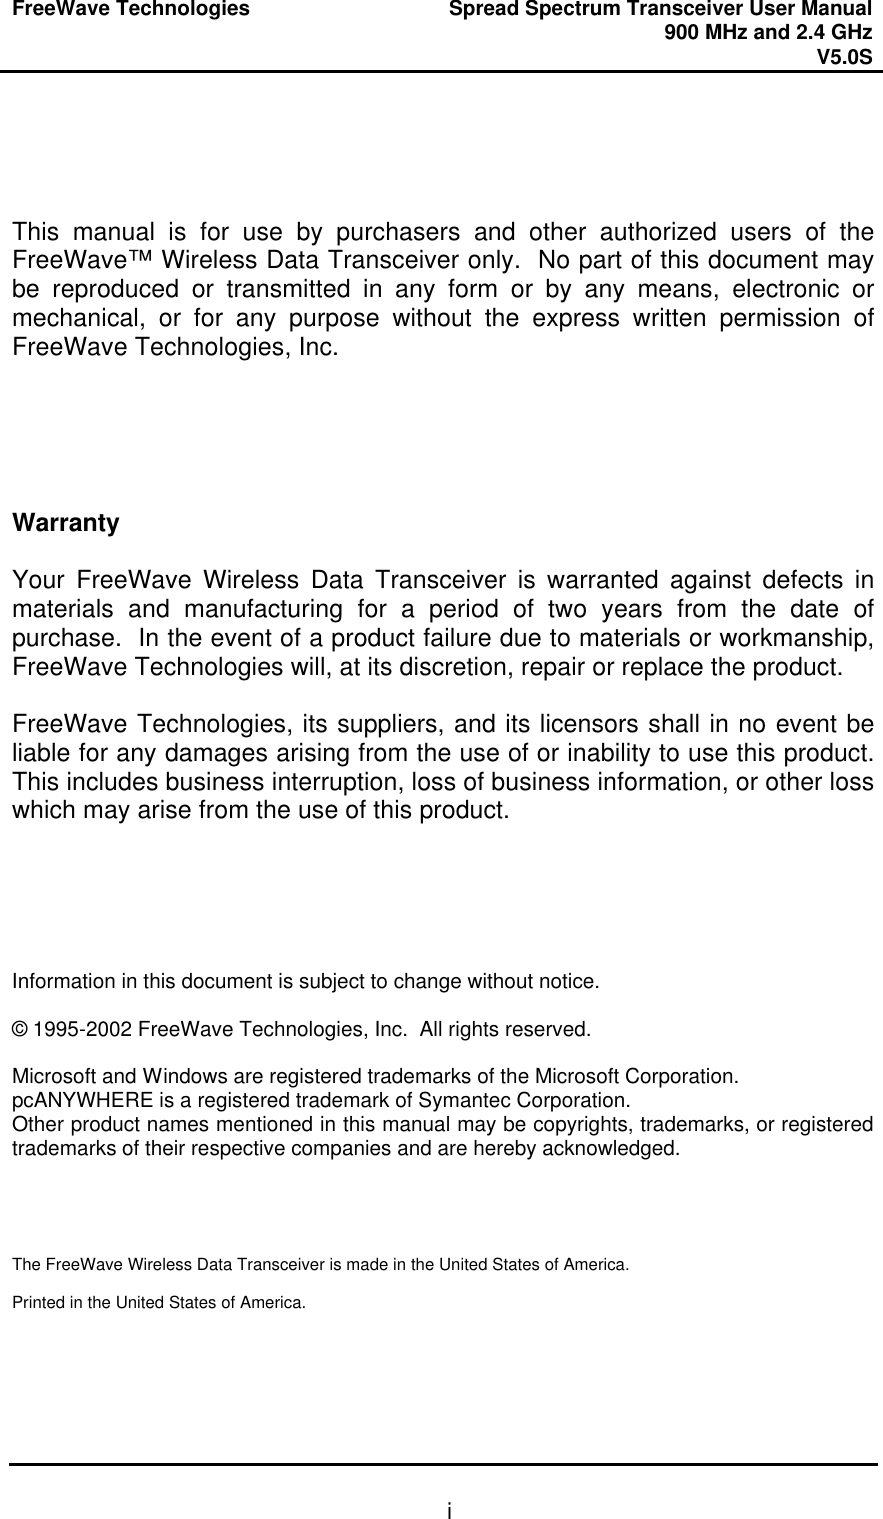 FreeWave Technologies Spread Spectrum Transceiver User Manual 900 MHz and 2.4 GHz V5.0S   i    This manual is for use by purchasers and other authorized users of the FreeWave™ Wireless Data Transceiver only.  No part of this document may be reproduced or transmitted in any form or by any means, electronic or mechanical, or for any purpose without the express written permission of FreeWave Technologies, Inc.      Warranty  Your FreeWave Wireless Data Transceiver is warranted against defects in materials and manufacturing for a period of two years from the date of purchase.  In the event of a product failure due to materials or workmanship, FreeWave Technologies will, at its discretion, repair or replace the product.  FreeWave Technologies, its suppliers, and its licensors shall in no event be liable for any damages arising from the use of or inability to use this product.  This includes business interruption, loss of business information, or other loss which may arise from the use of this product.      Information in this document is subject to change without notice.  © 1995-2002 FreeWave Technologies, Inc.  All rights reserved.  Microsoft and Windows are registered trademarks of the Microsoft Corporation. pcANYWHERE is a registered trademark of Symantec Corporation. Other product names mentioned in this manual may be copyrights, trademarks, or registered trademarks of their respective companies and are hereby acknowledged.     The FreeWave Wireless Data Transceiver is made in the United States of America.  Printed in the United States of America. 